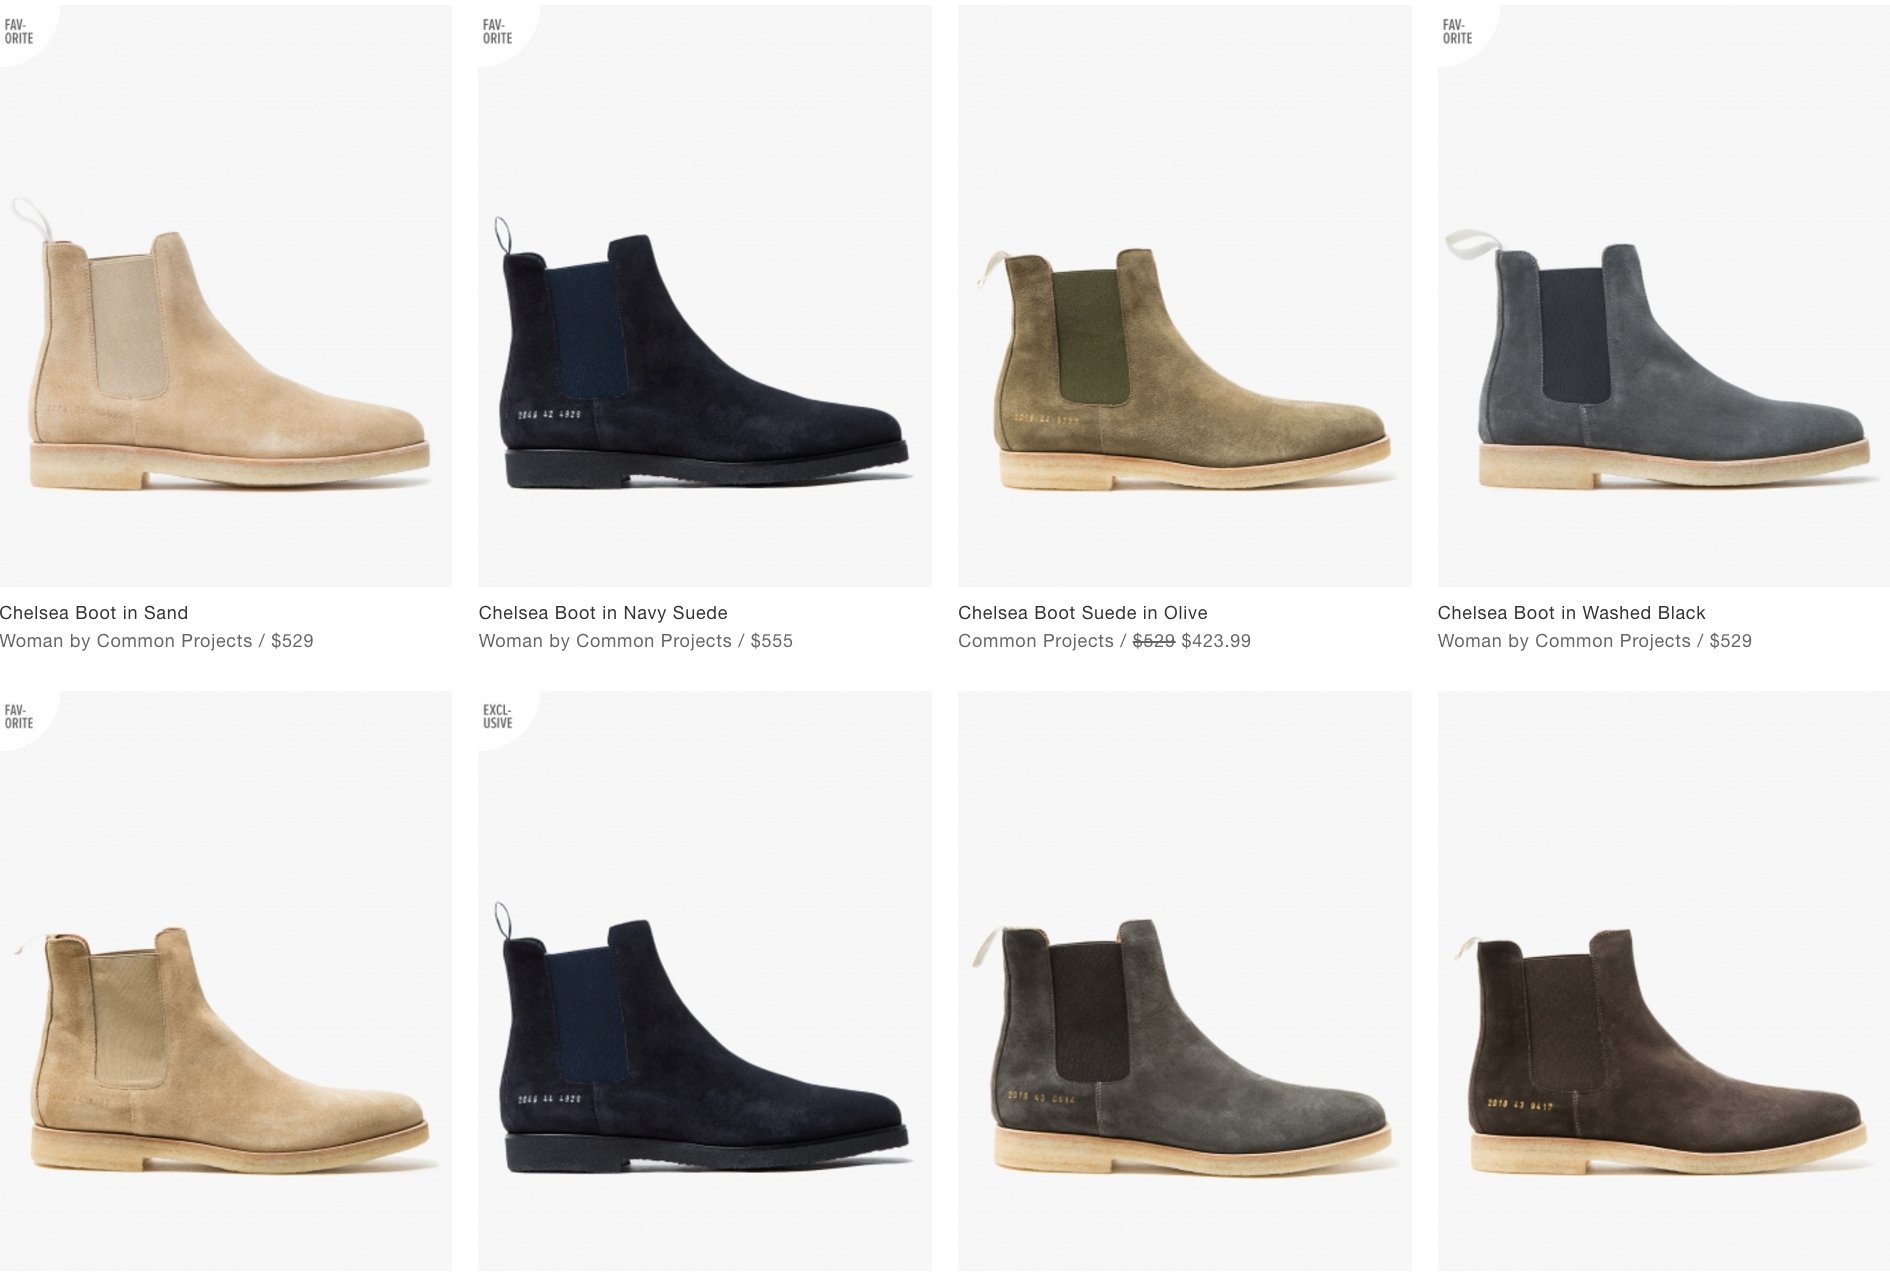 Visum grill Vaccinere SOLELINKS on Twitter: "SALE ALERT ! Common Projects Chelsea Boot on sale  for $360 with code BOOST15 (retail 530) https://t.co/zBi0zix9yW  https://t.co/YUNhPS7li9" / Twitter